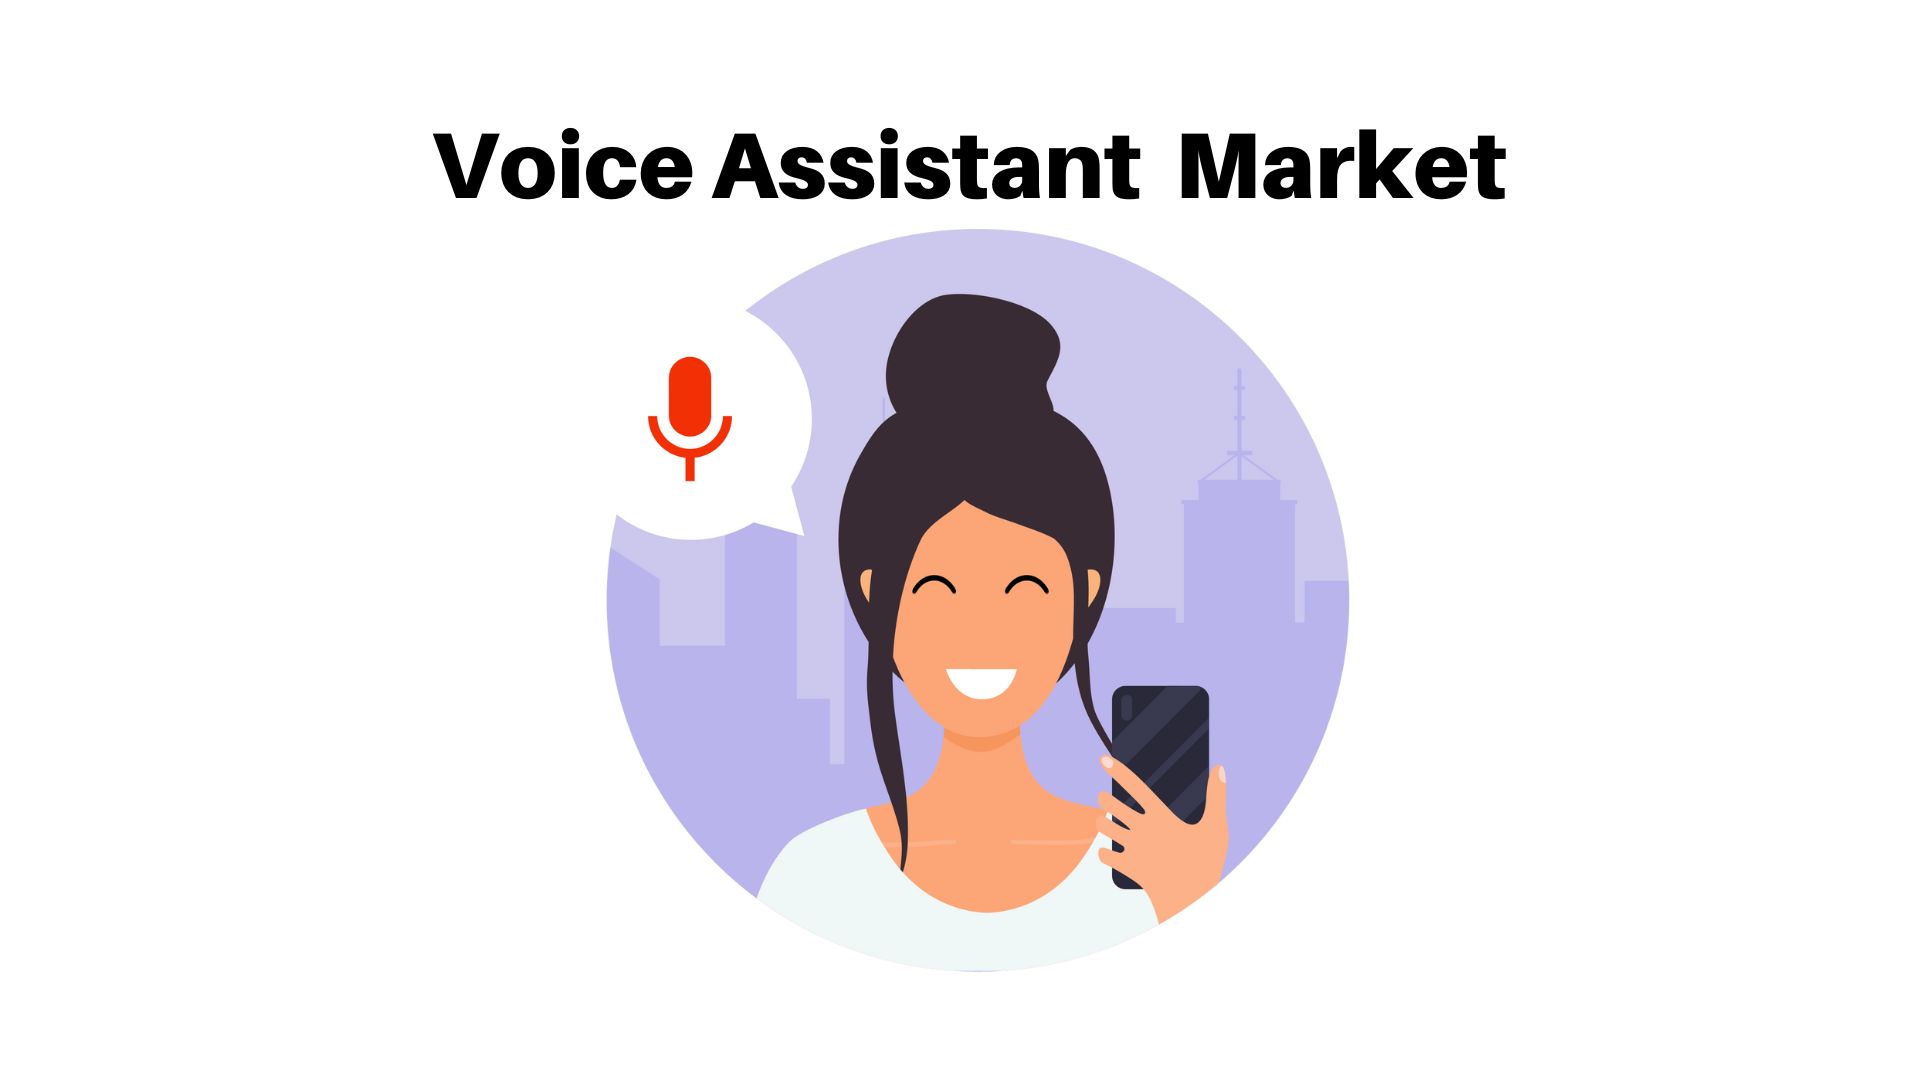 Global Voice Assistant Market Projected To Reach USD 90.36 Bn By 2033 | CAGR Of 31.6%